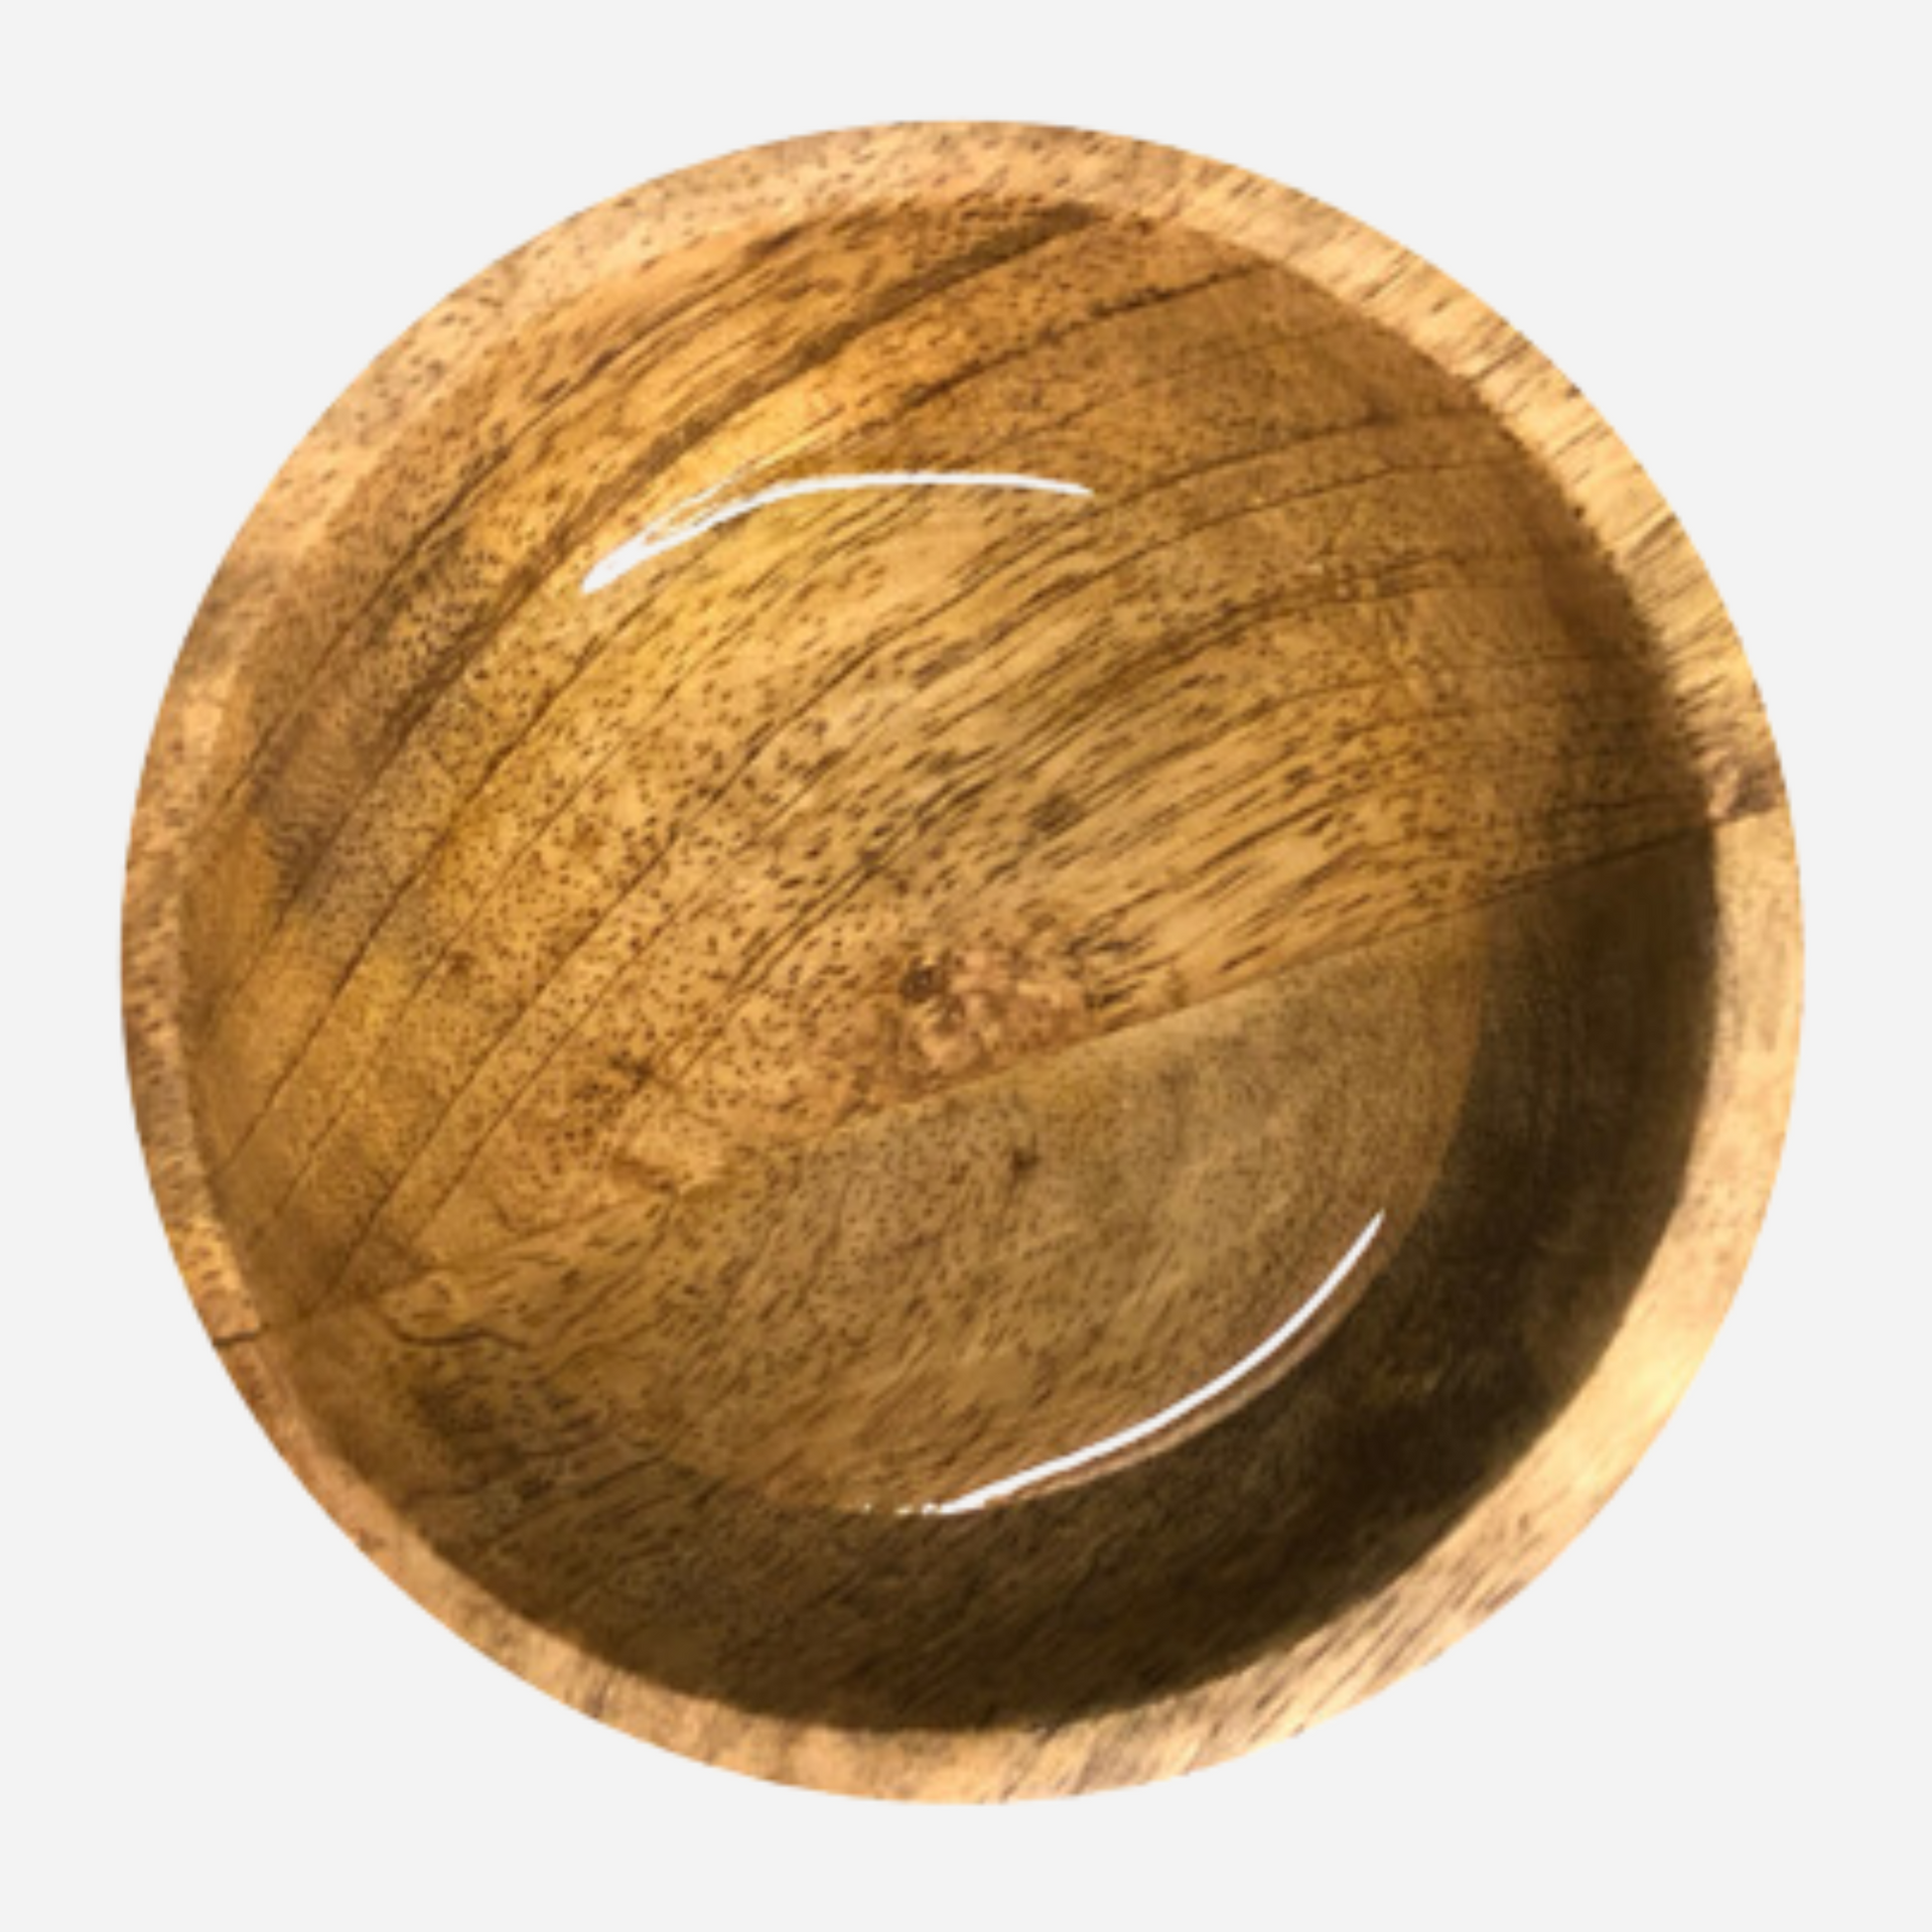 wooden bowl with vergtable glycerine inside